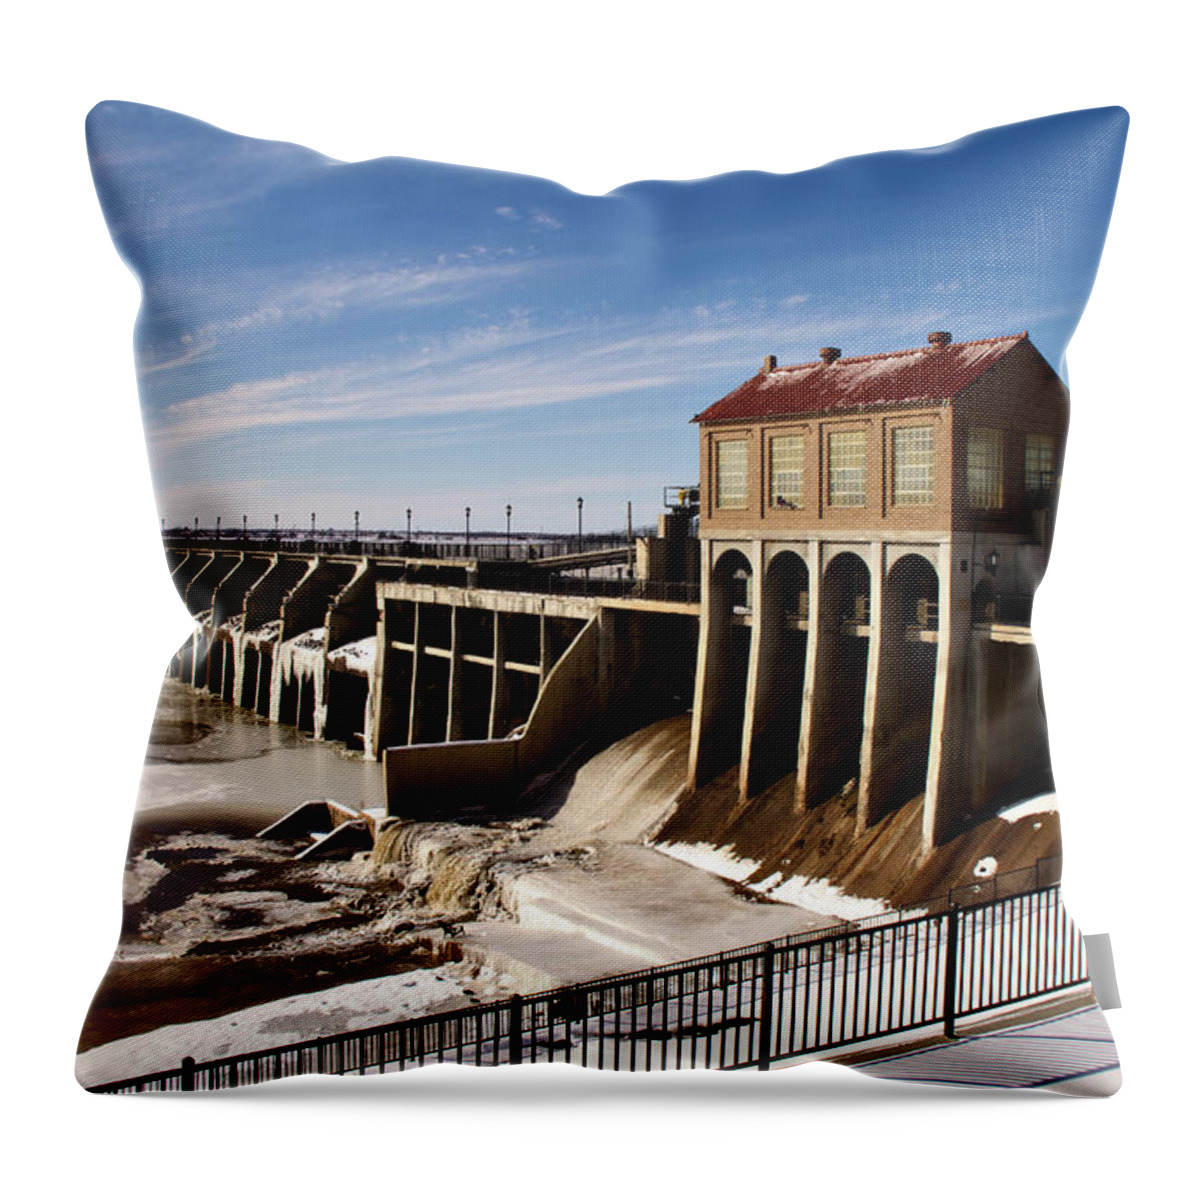 Oklahoma Throw Pillow featuring the photograph Icy Overholser by Lana Trussell